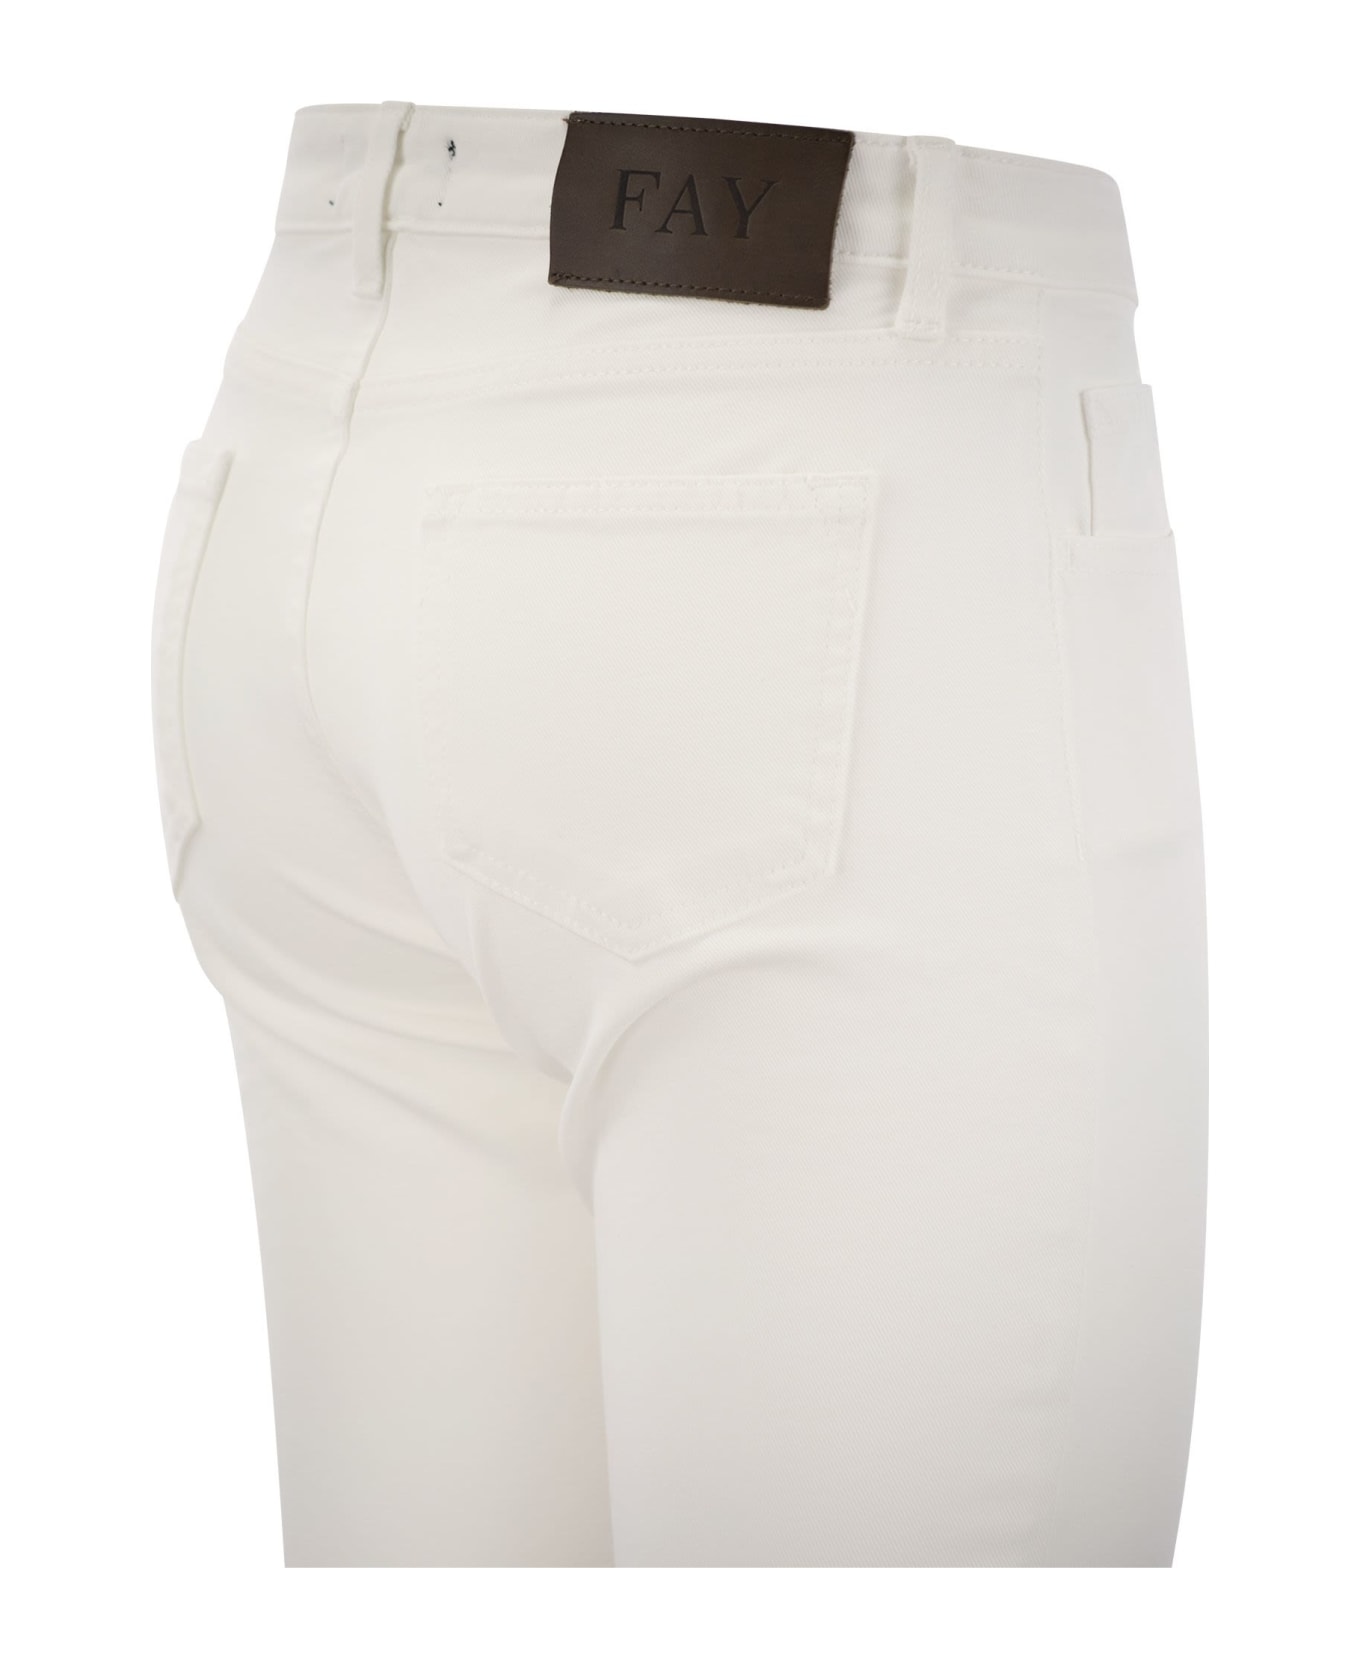 Fay 5-pocket SAMS Trousers In Stretch Cotton.